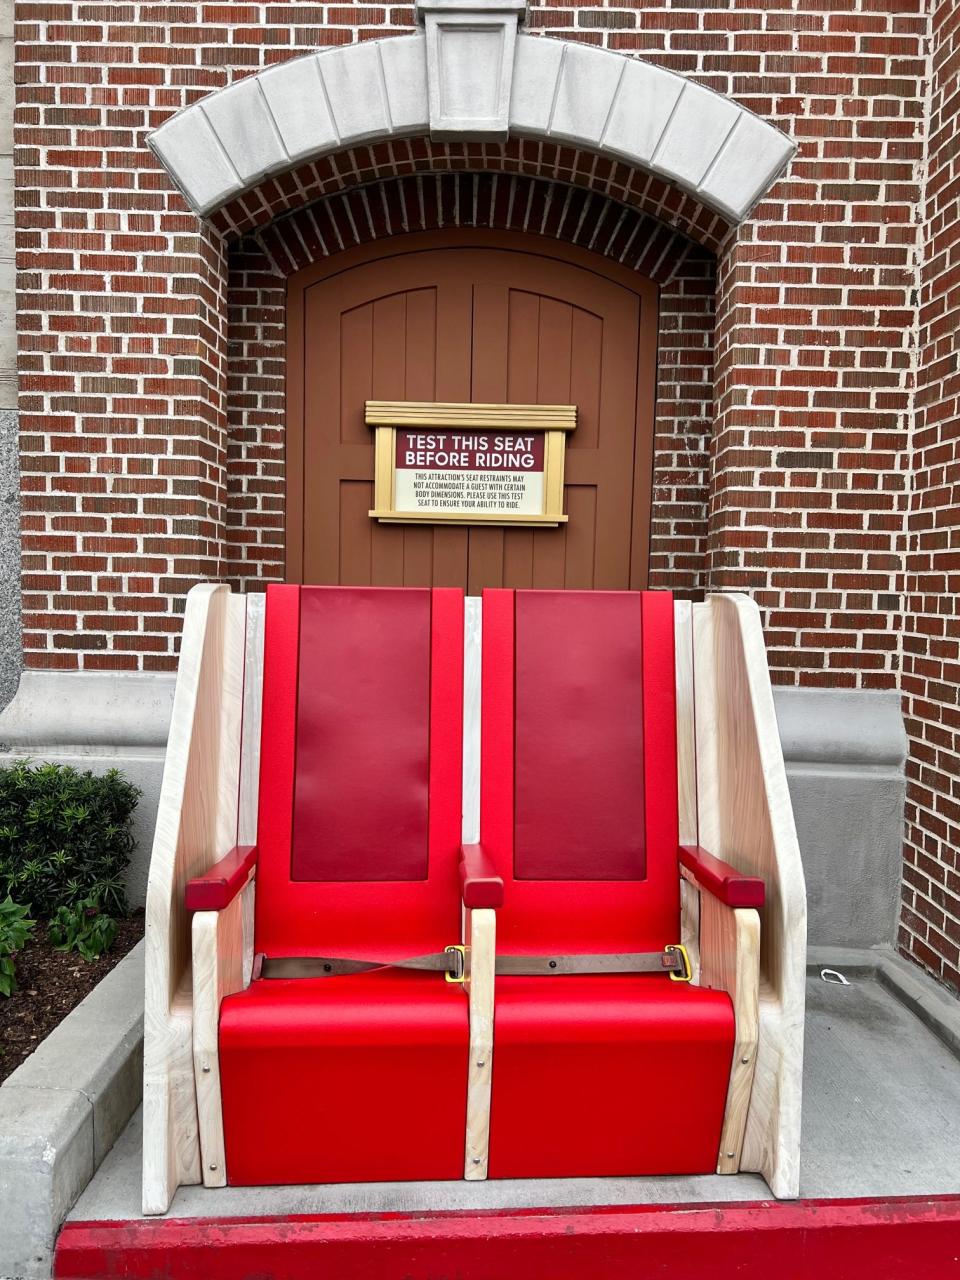 Sample seats let guests see if they will fit on Race Through New York Starring Jimmy Fallon at Universal Studios Florida.